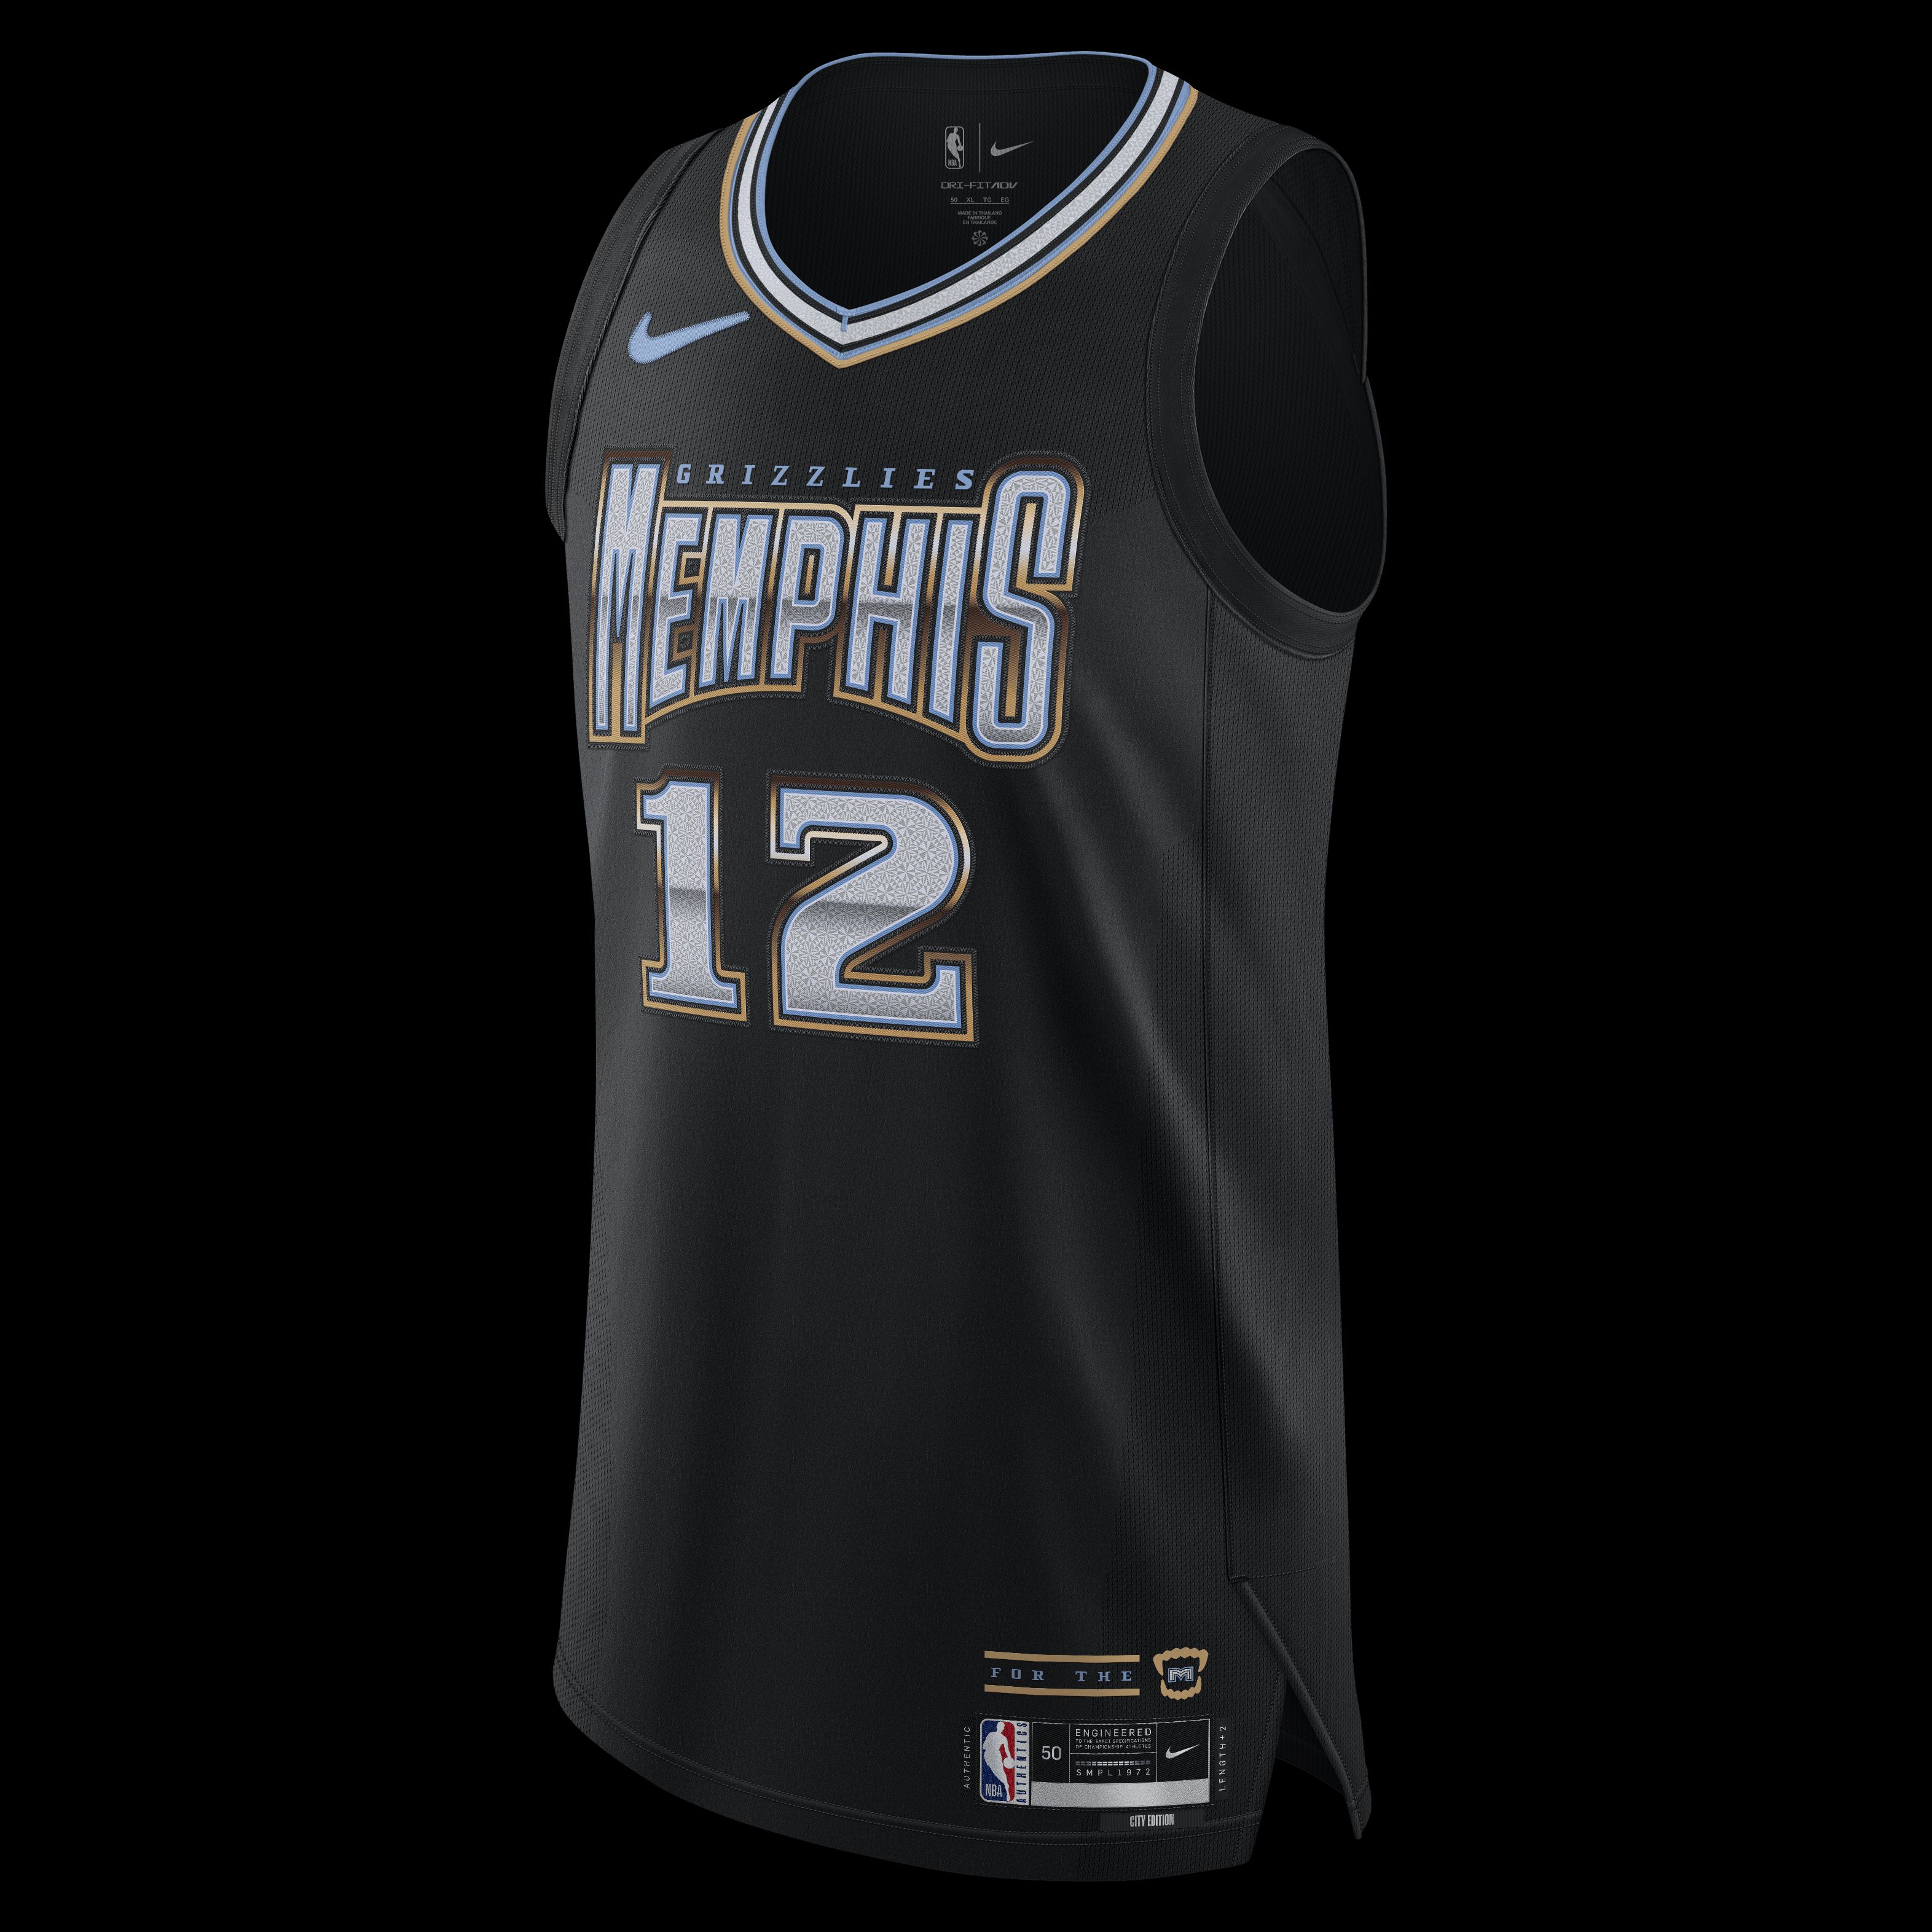 Grizzlies unveil new 'For the M' City Edition jerseys, News